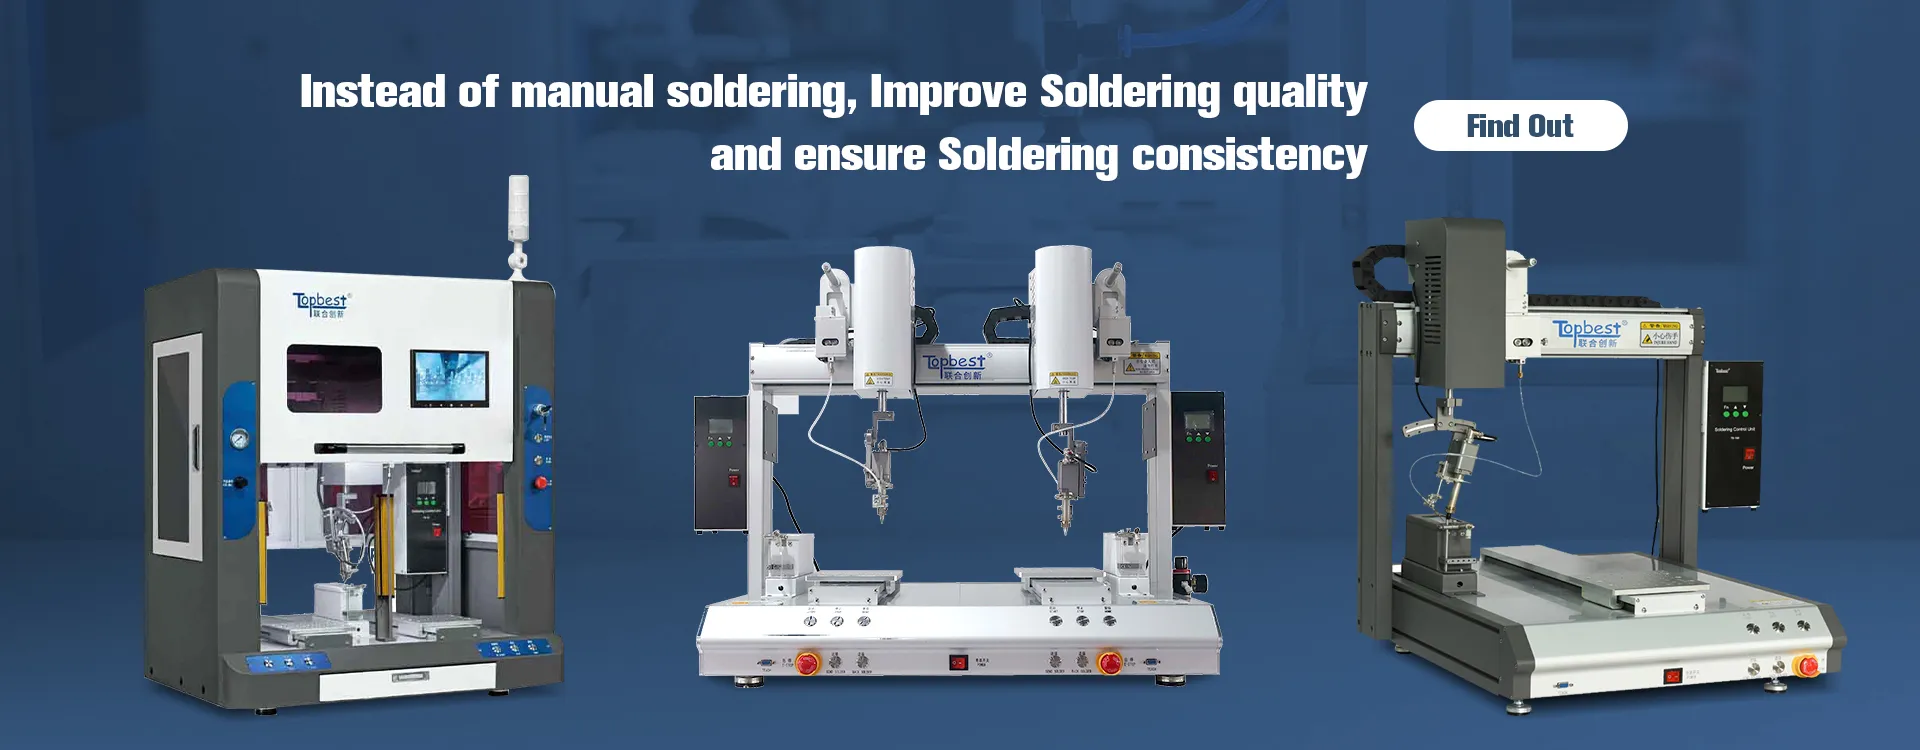 Automatic Soldering System